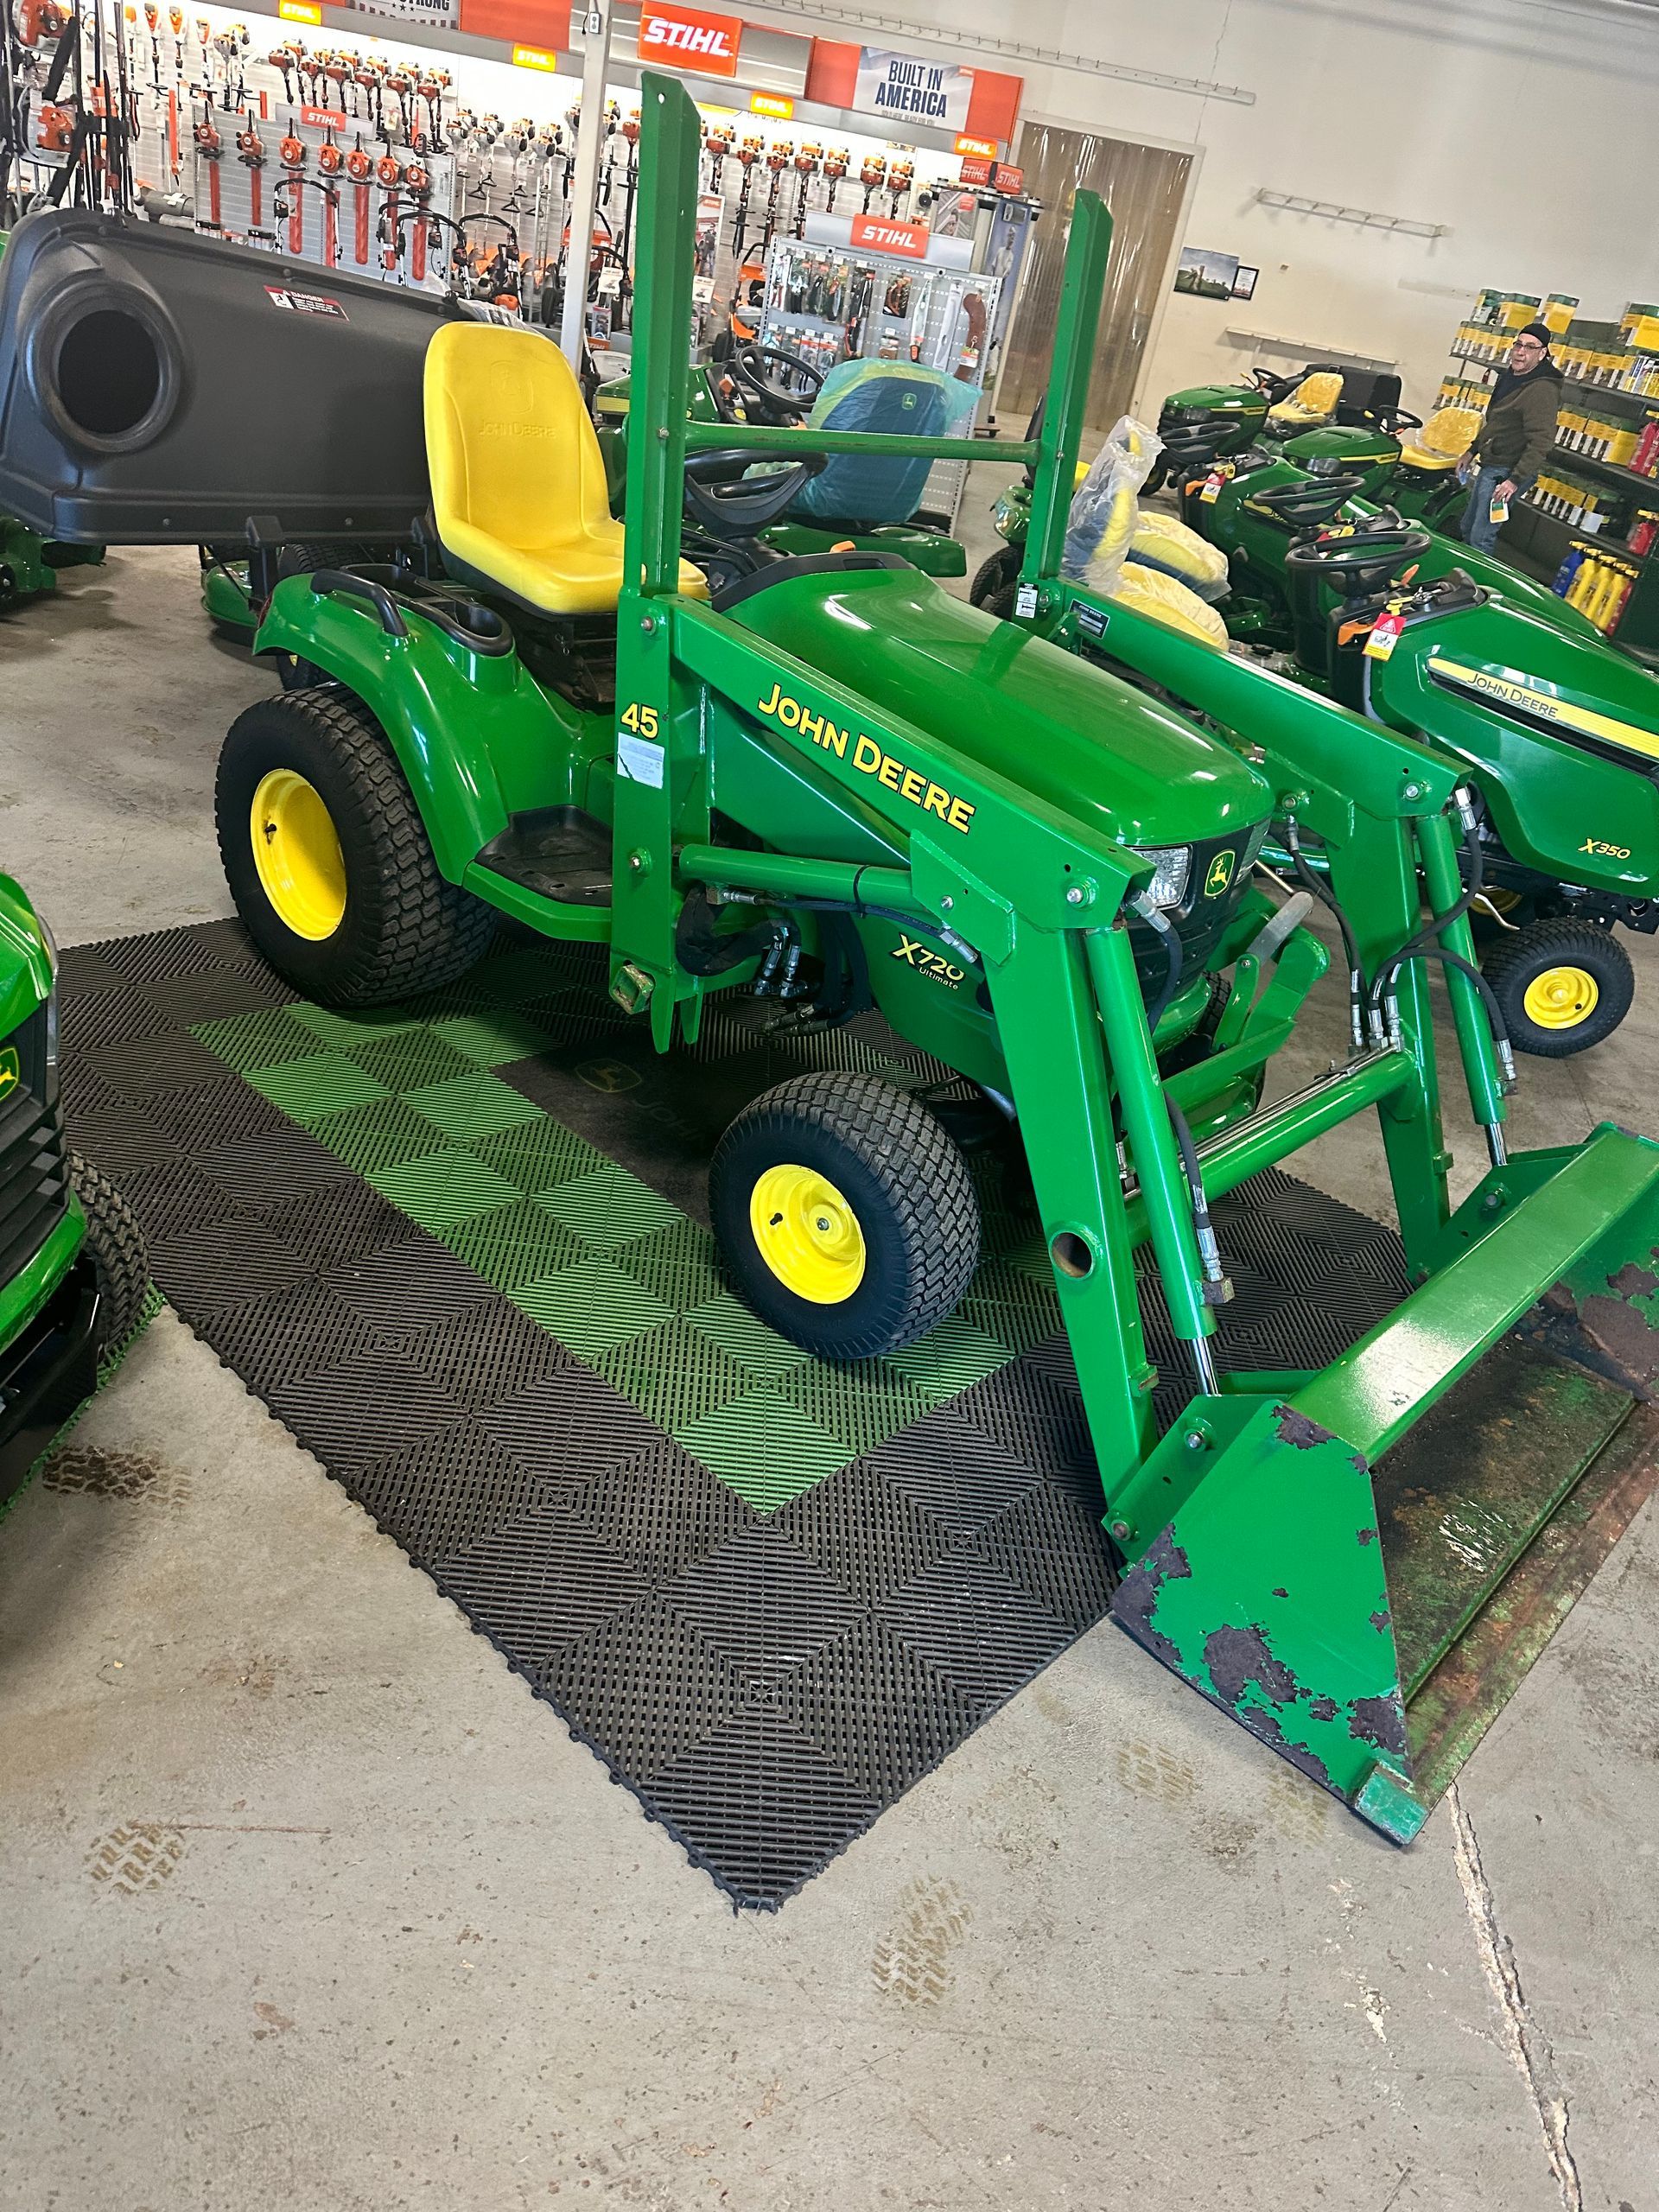 A john deere tractor is sitting on a mat in a showroom.